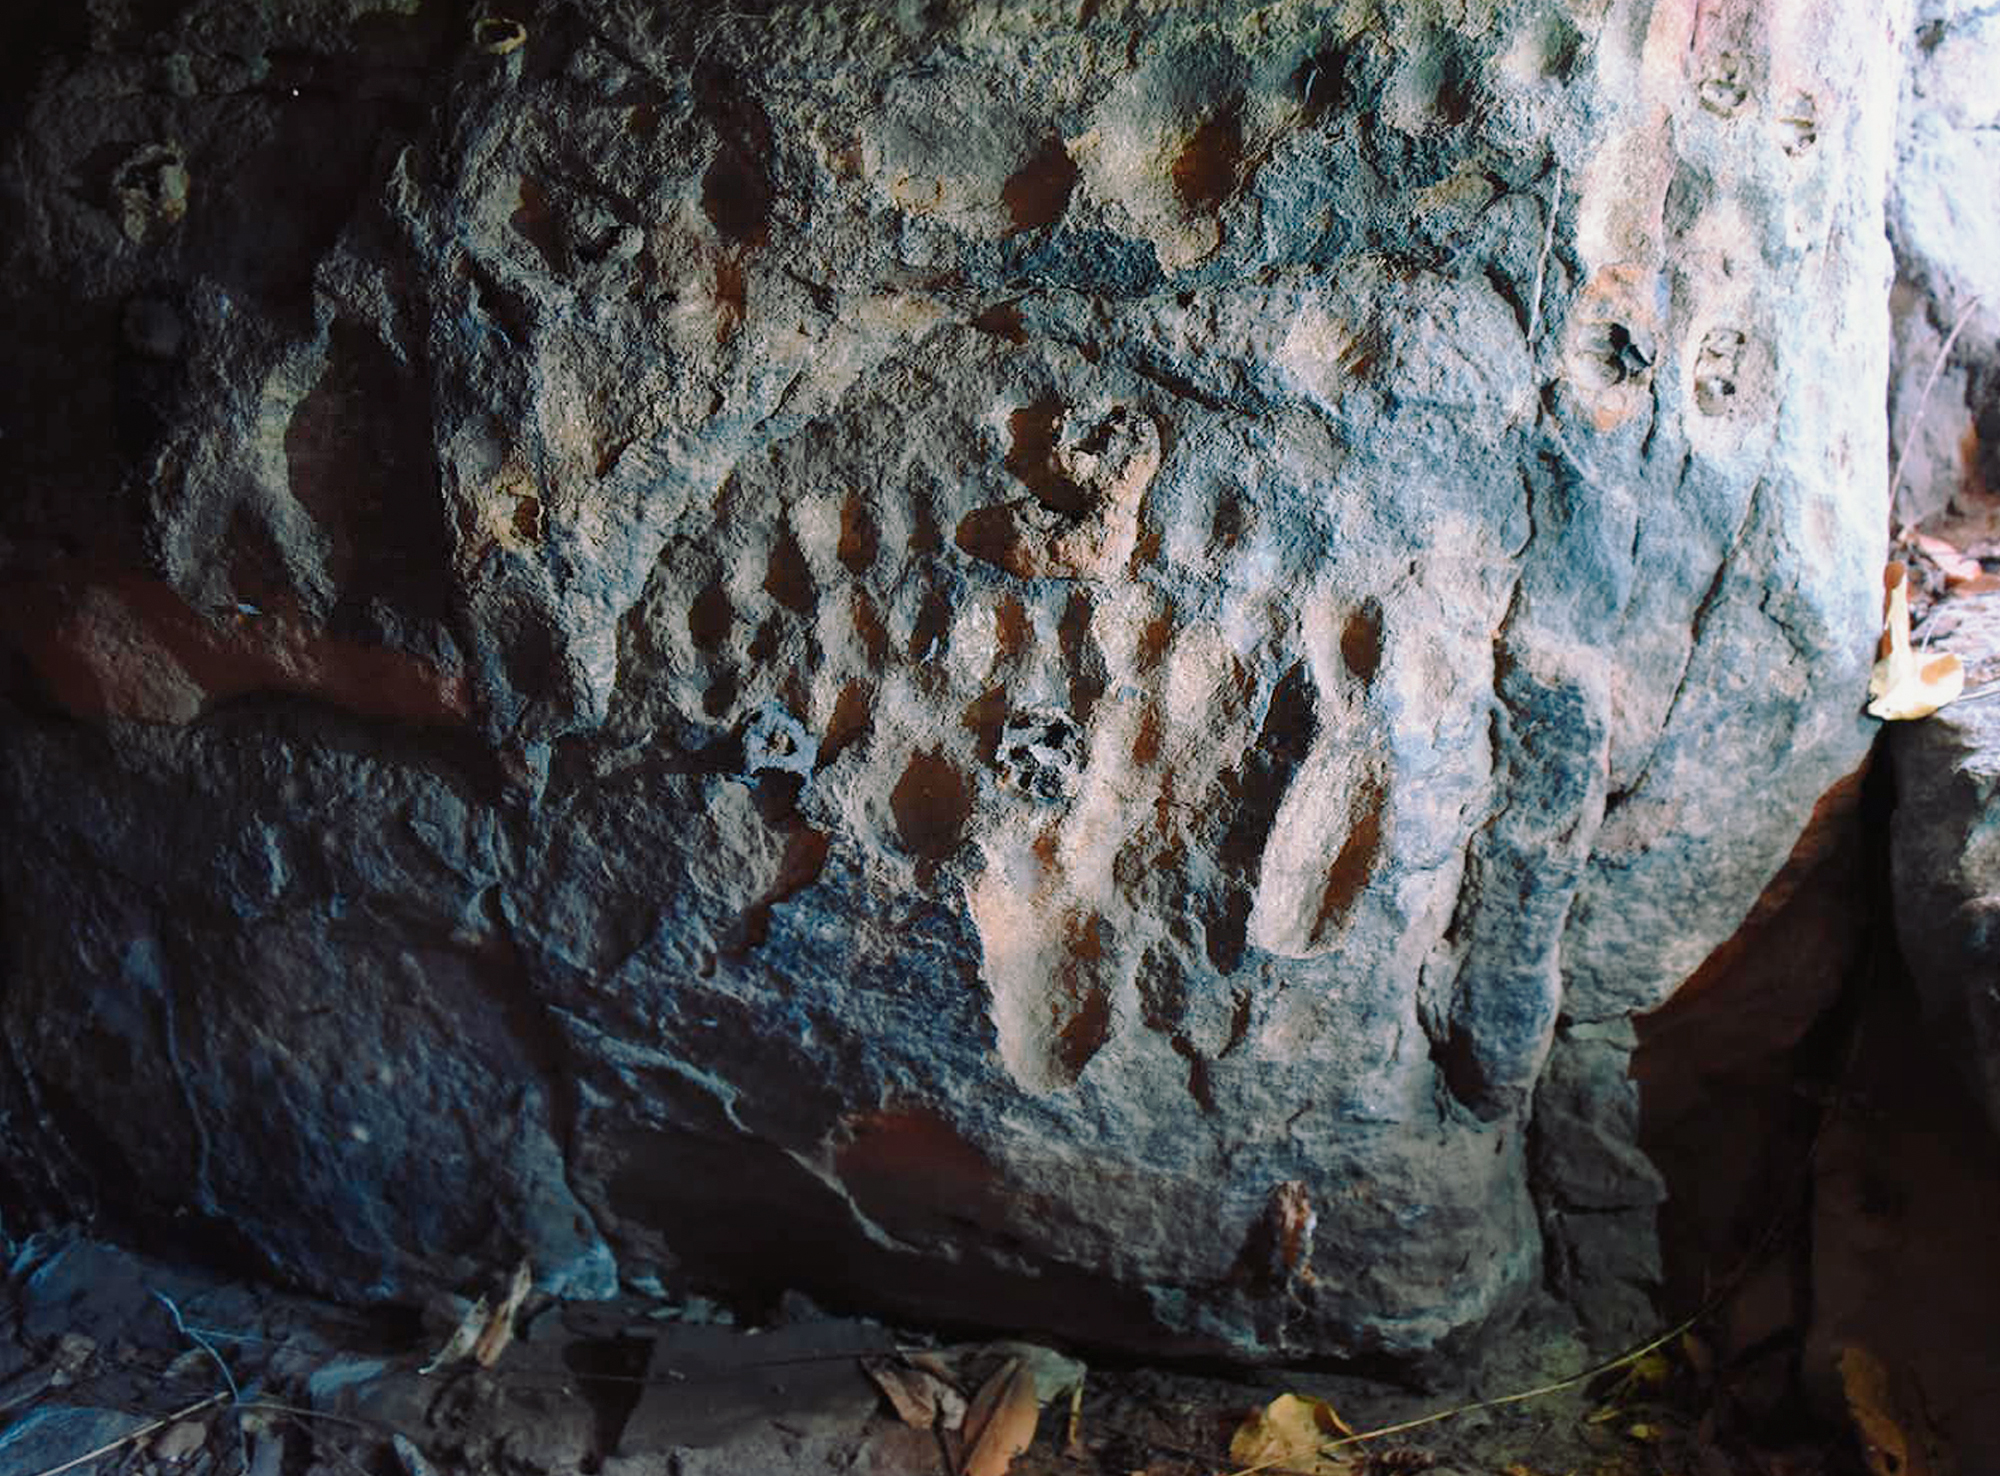 Cupules, or circular man-made hollows, ground into a dark mineral coating at a rock art site on the Drysdale River, Balanggarra country